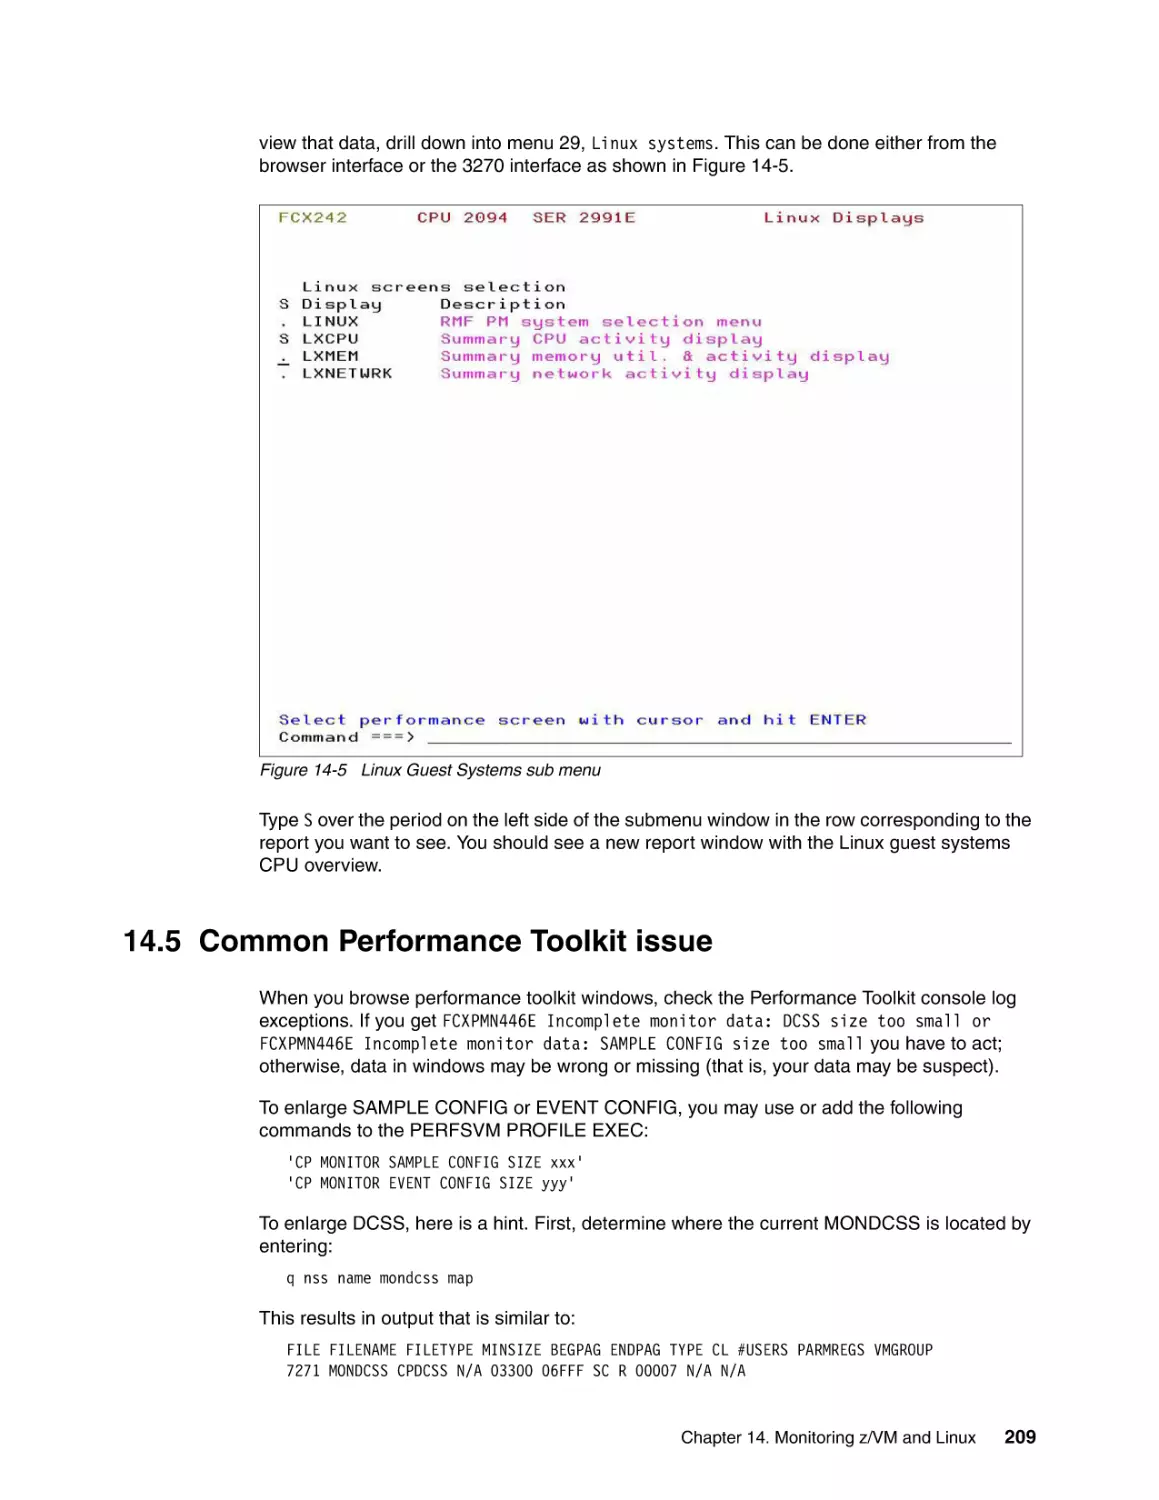 14.5 Common Performance Toolkit issue